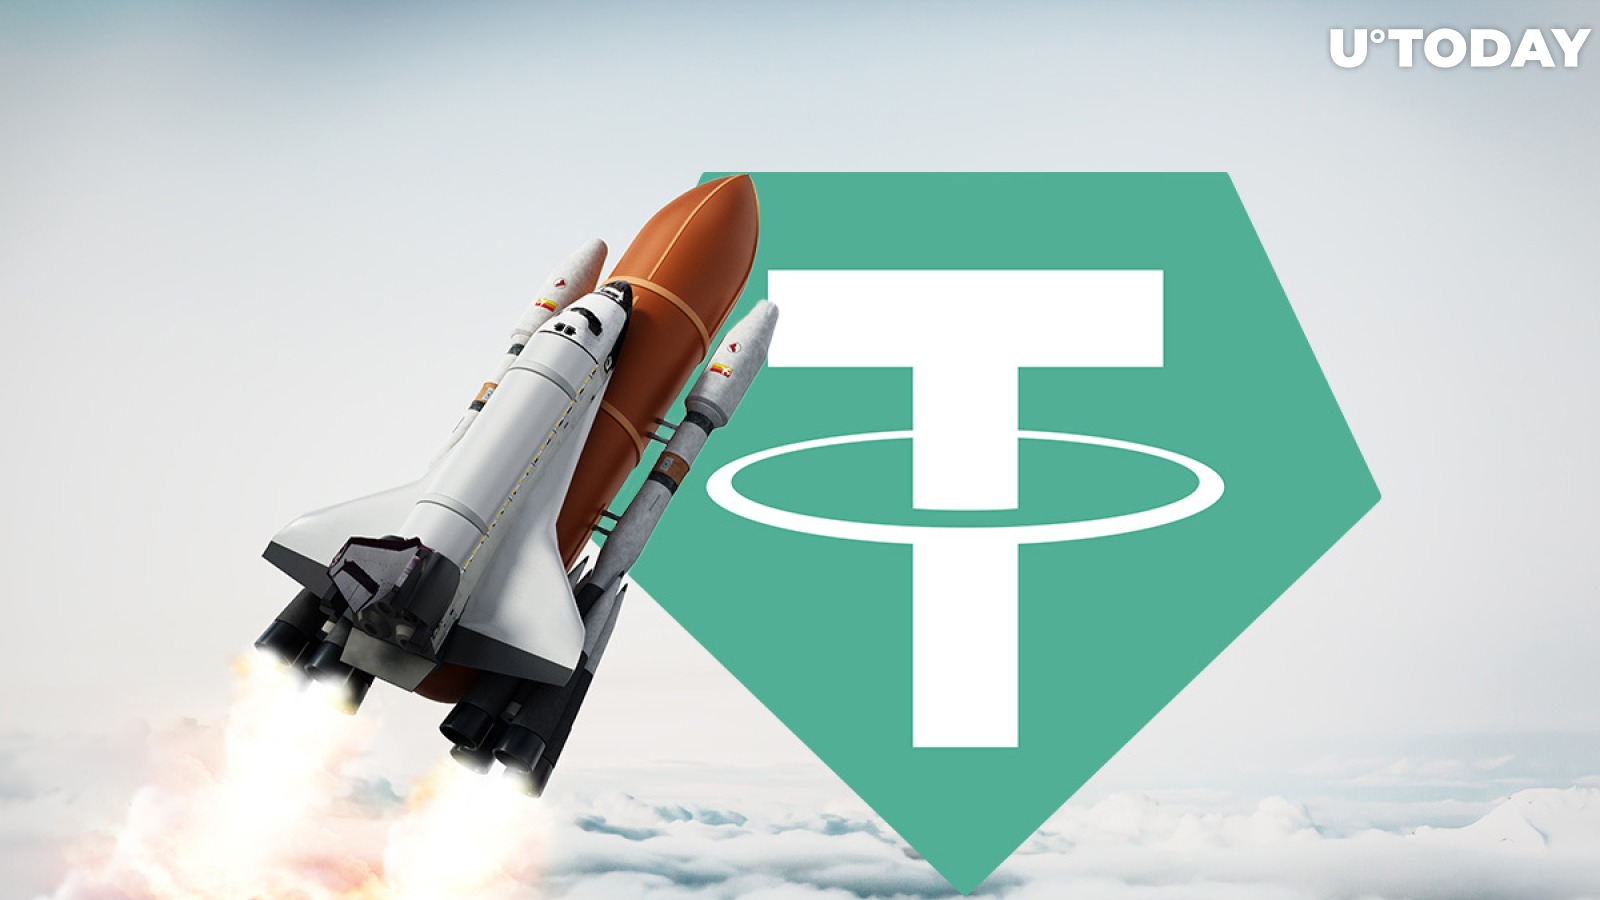 Polkadot (DOT), Kusama (KSM) to Be Next Platforms for Tether (USDT). Why Is This Important?